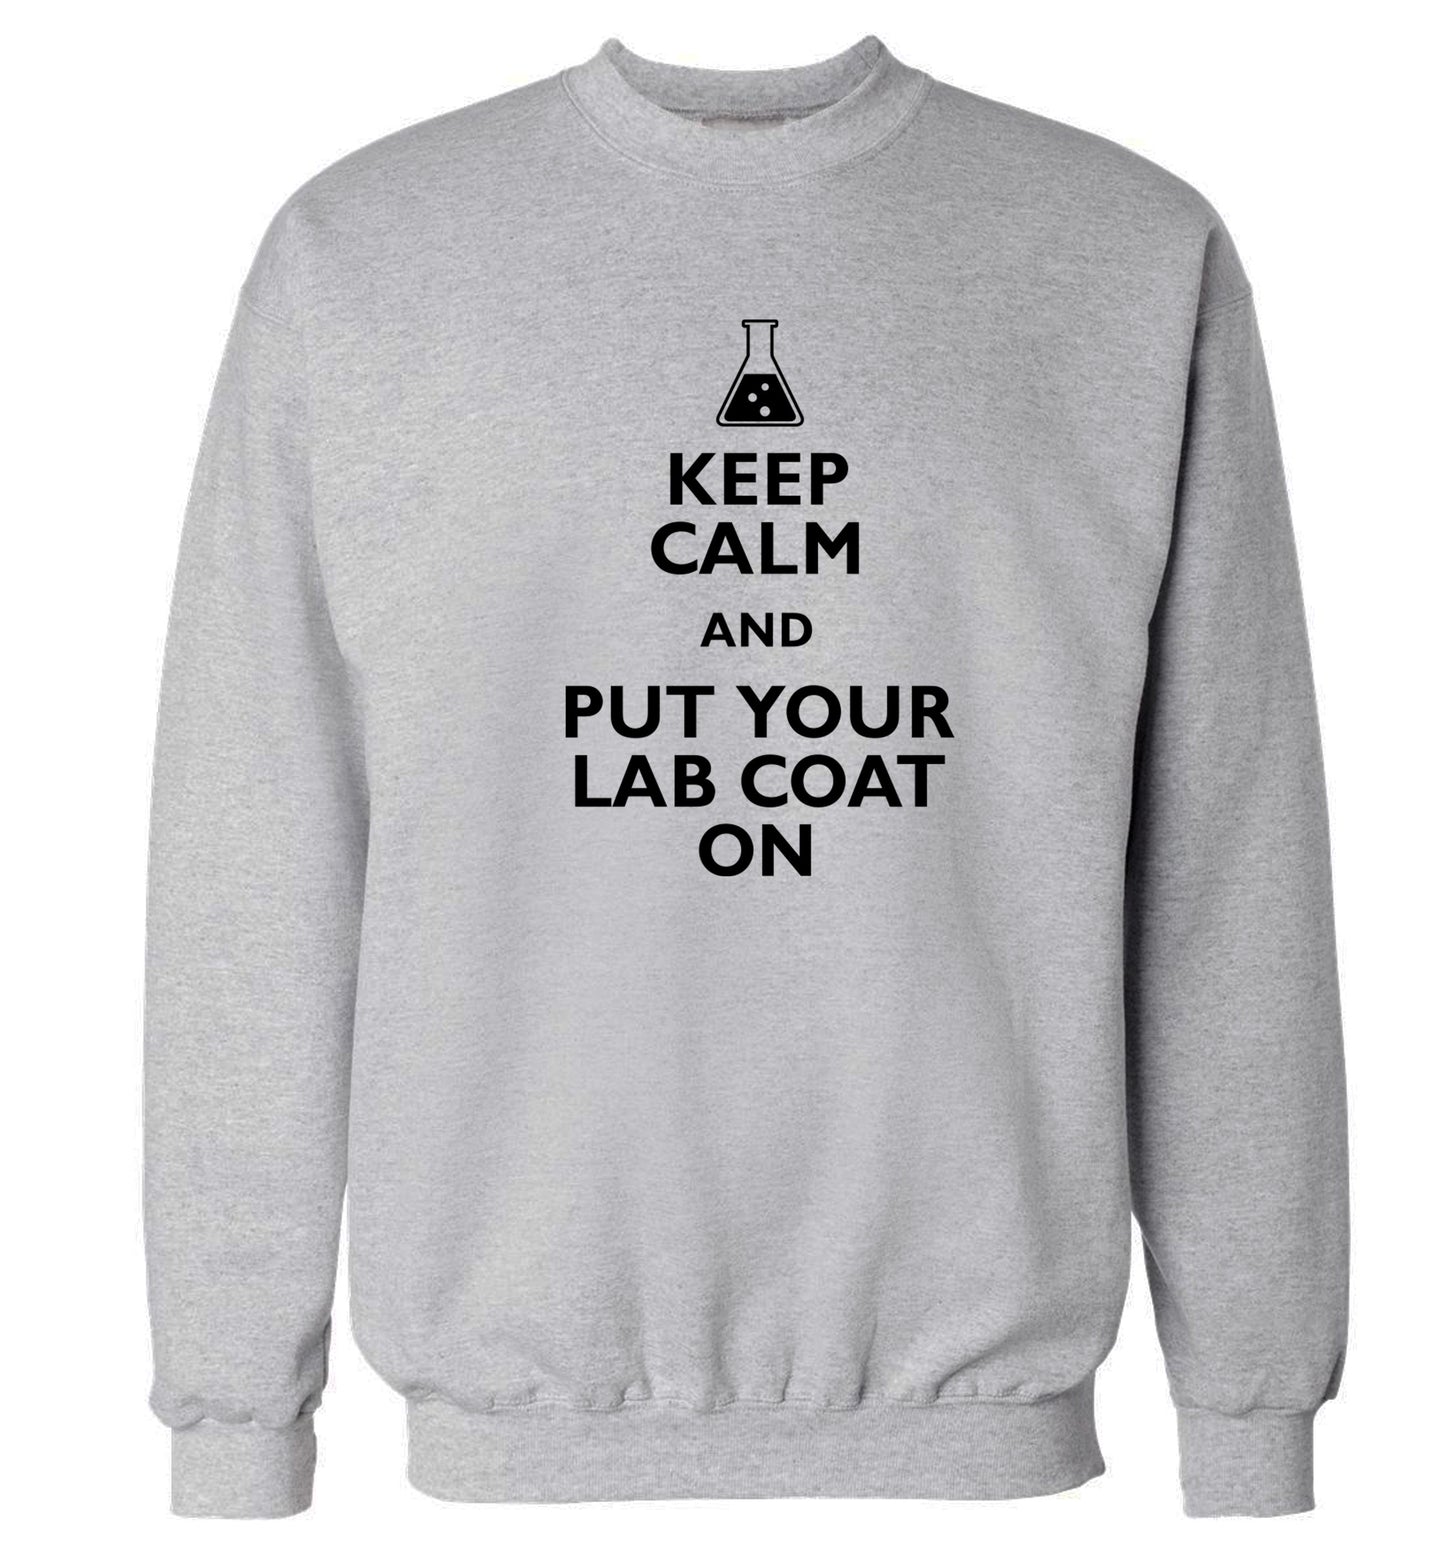 Keep calm and put your lab coat on Adult's unisex grey Sweater 2XL